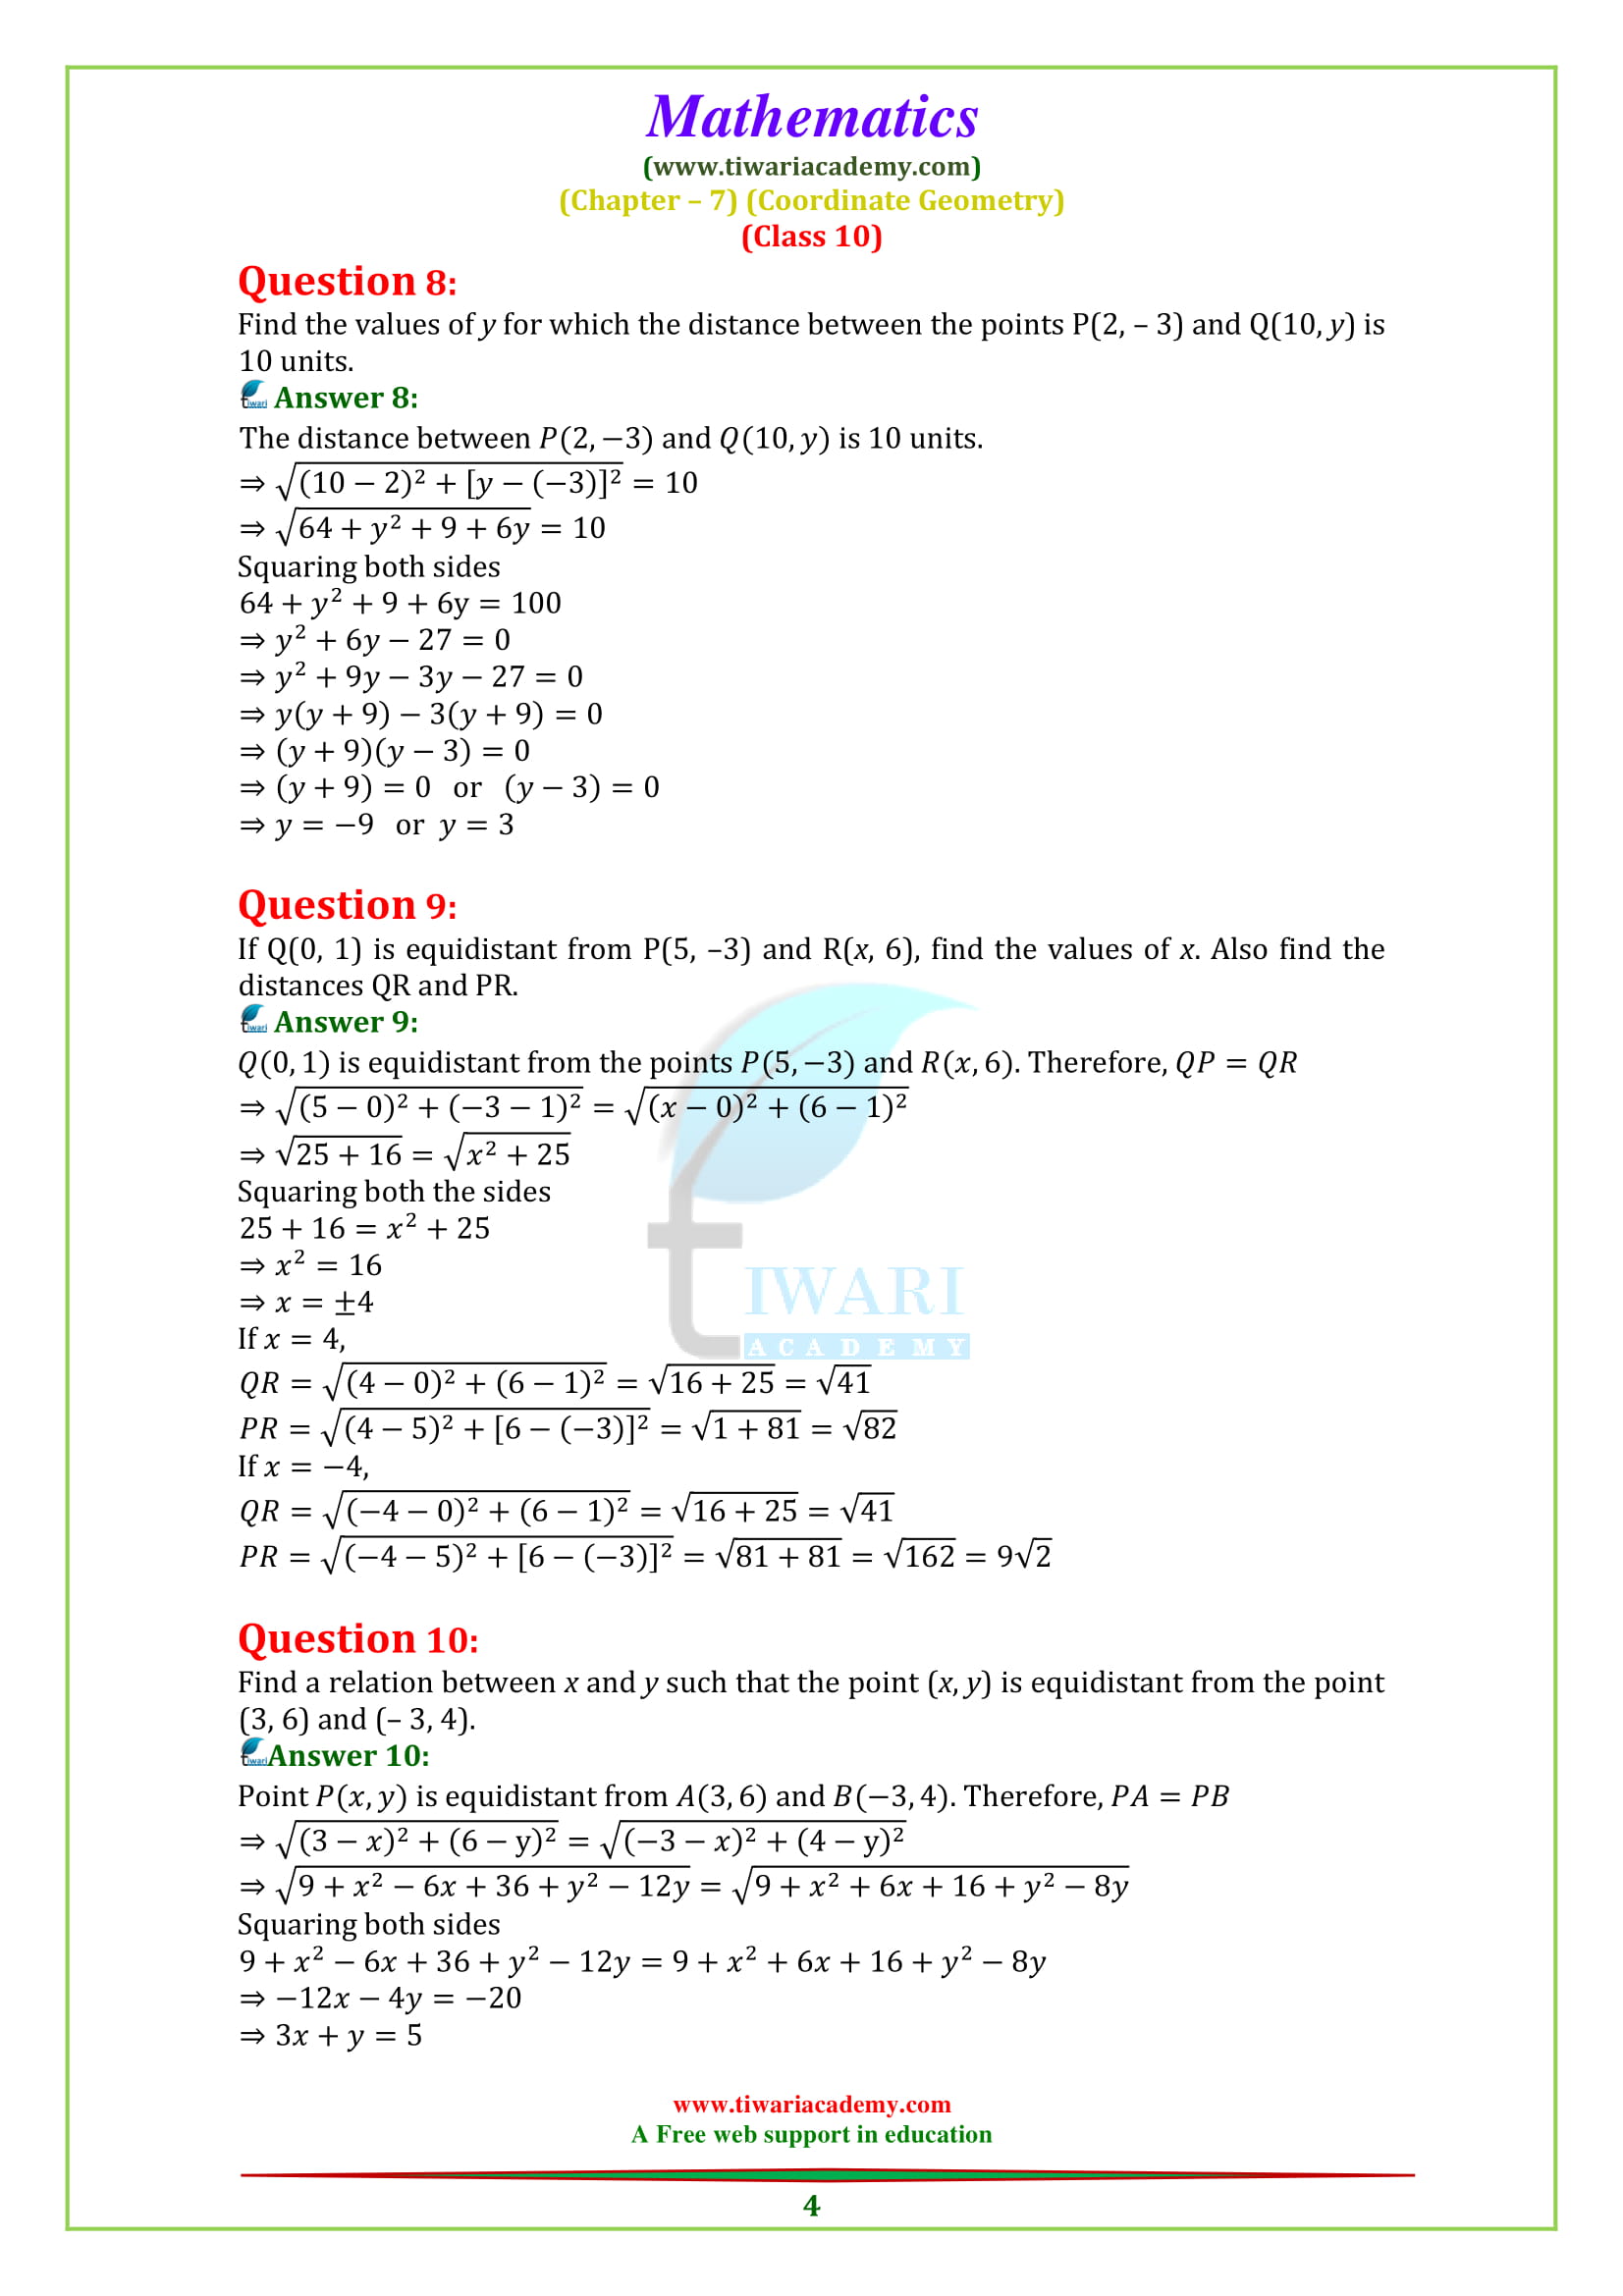 NCERT Solutions for Class 10 Maths Chapter 7 Exercise 7.1 question 1, 2, 3, 4, 5, 6, 7, 8, 9, 10.